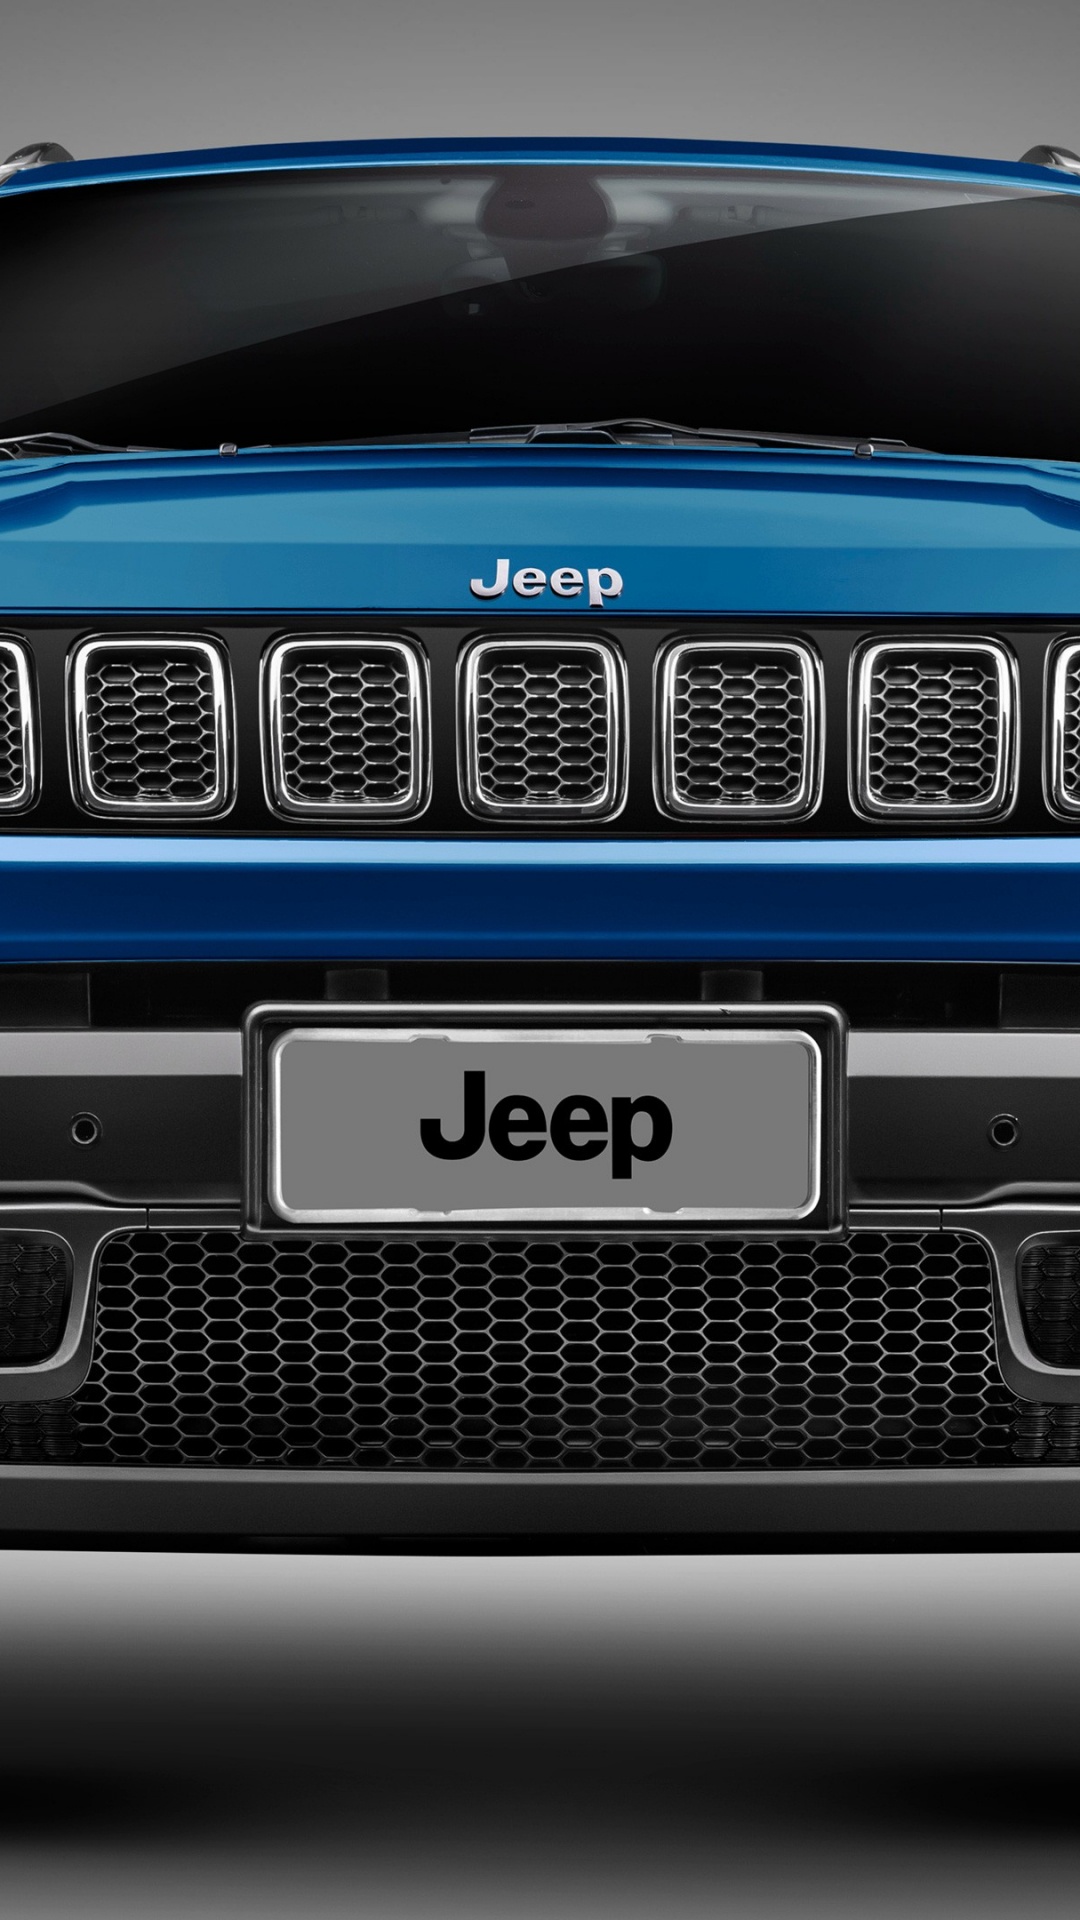 100+] Jeep Compass Wallpapers | Wallpapers.com